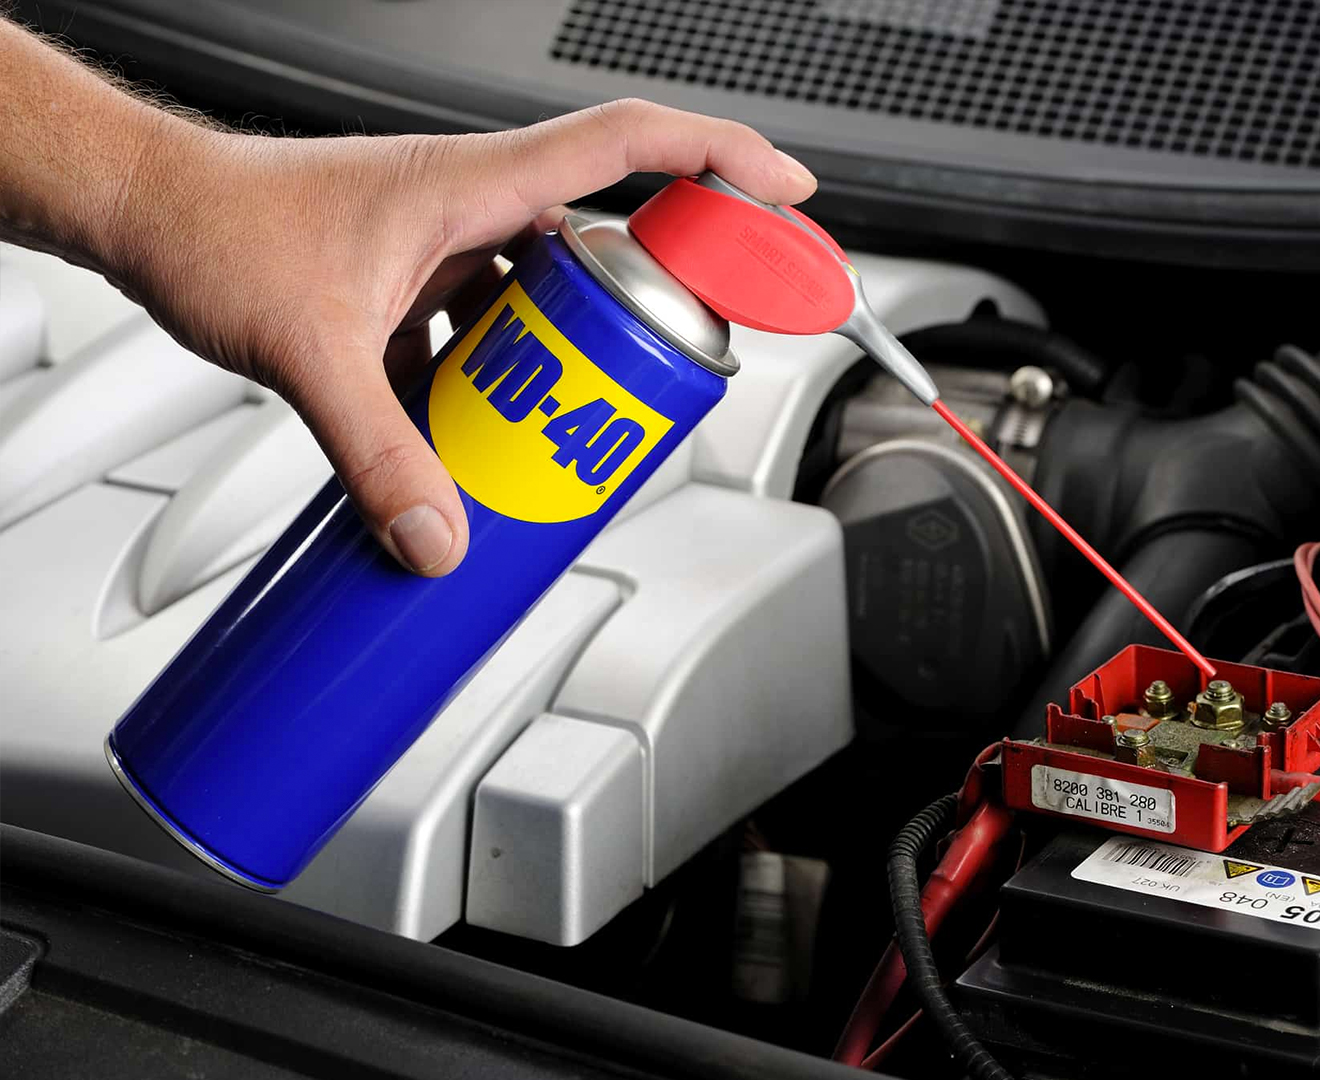 project-image-wd40 | A WD-40 product in someone's hand.